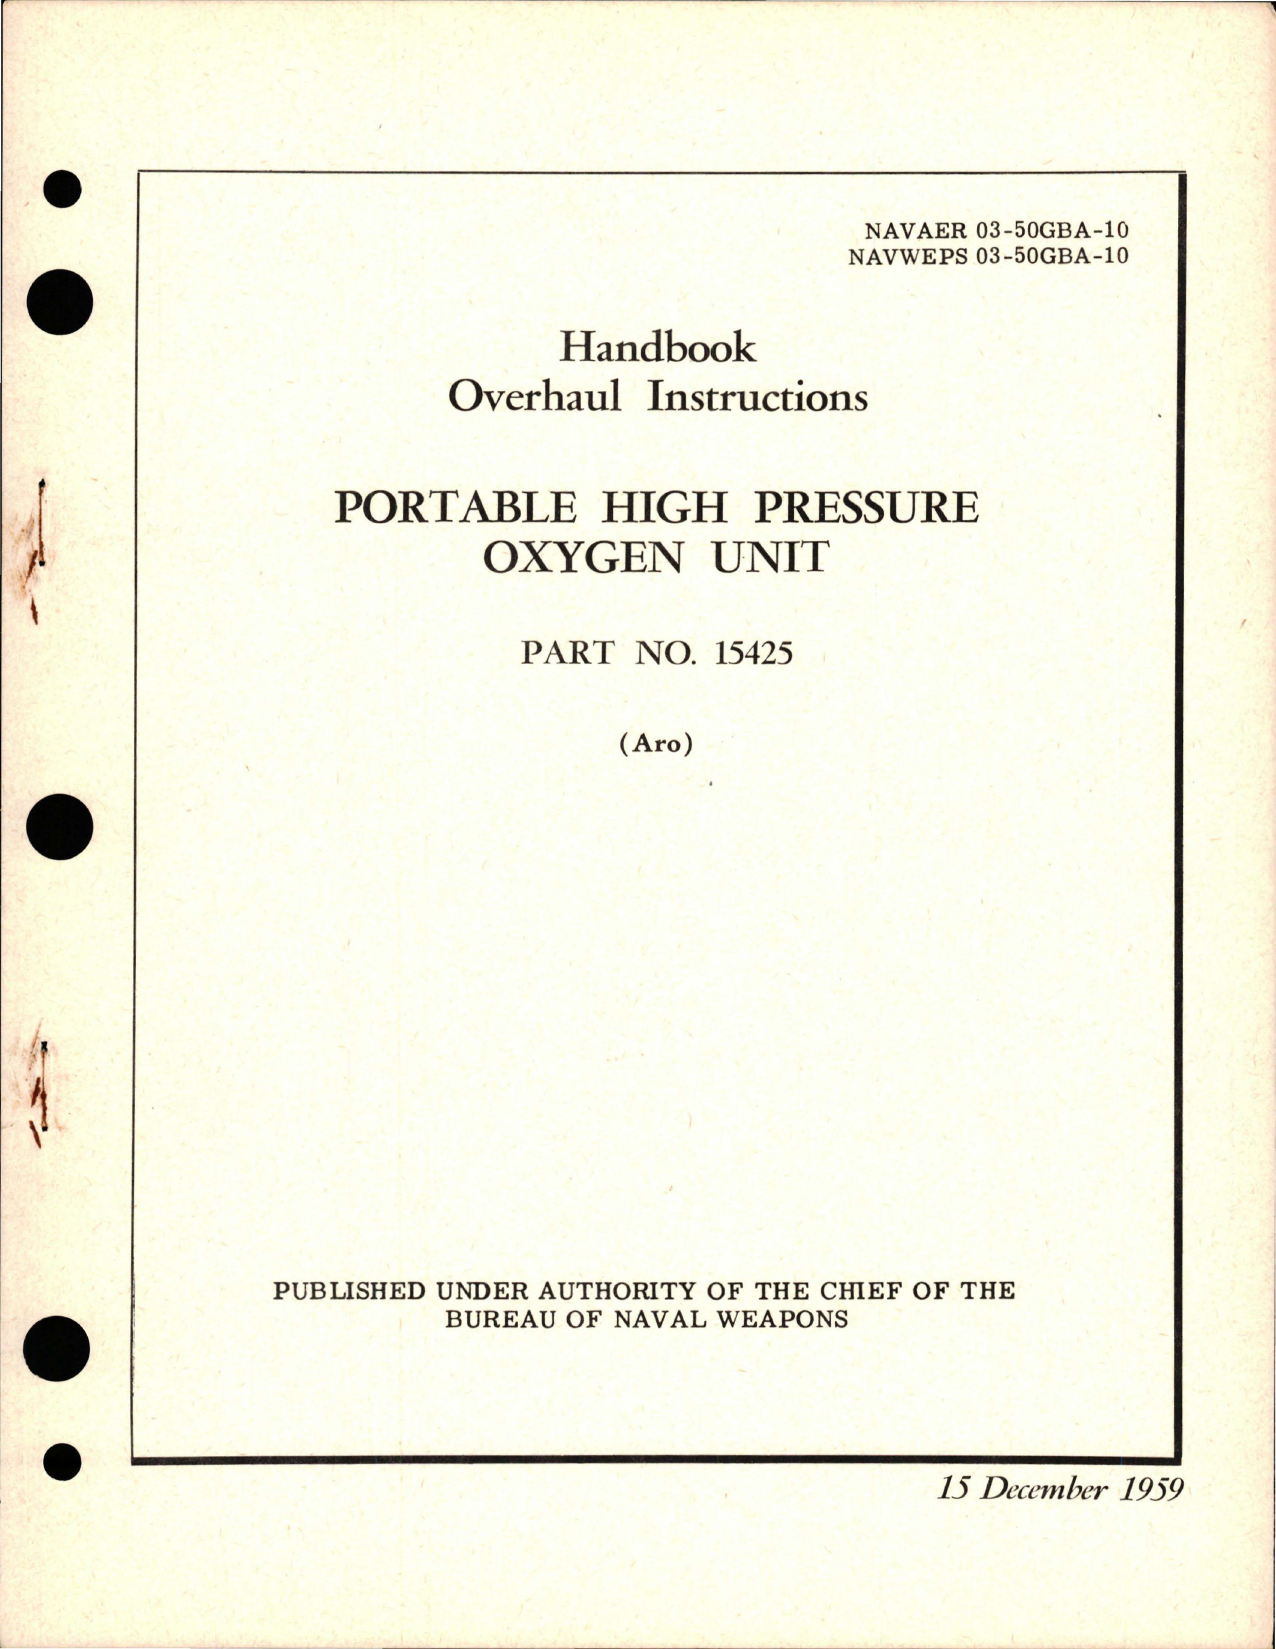 Sample page 1 from AirCorps Library document: Overhaul Instructions for Portable High Pressure Oxygen Unit - Part 15425 